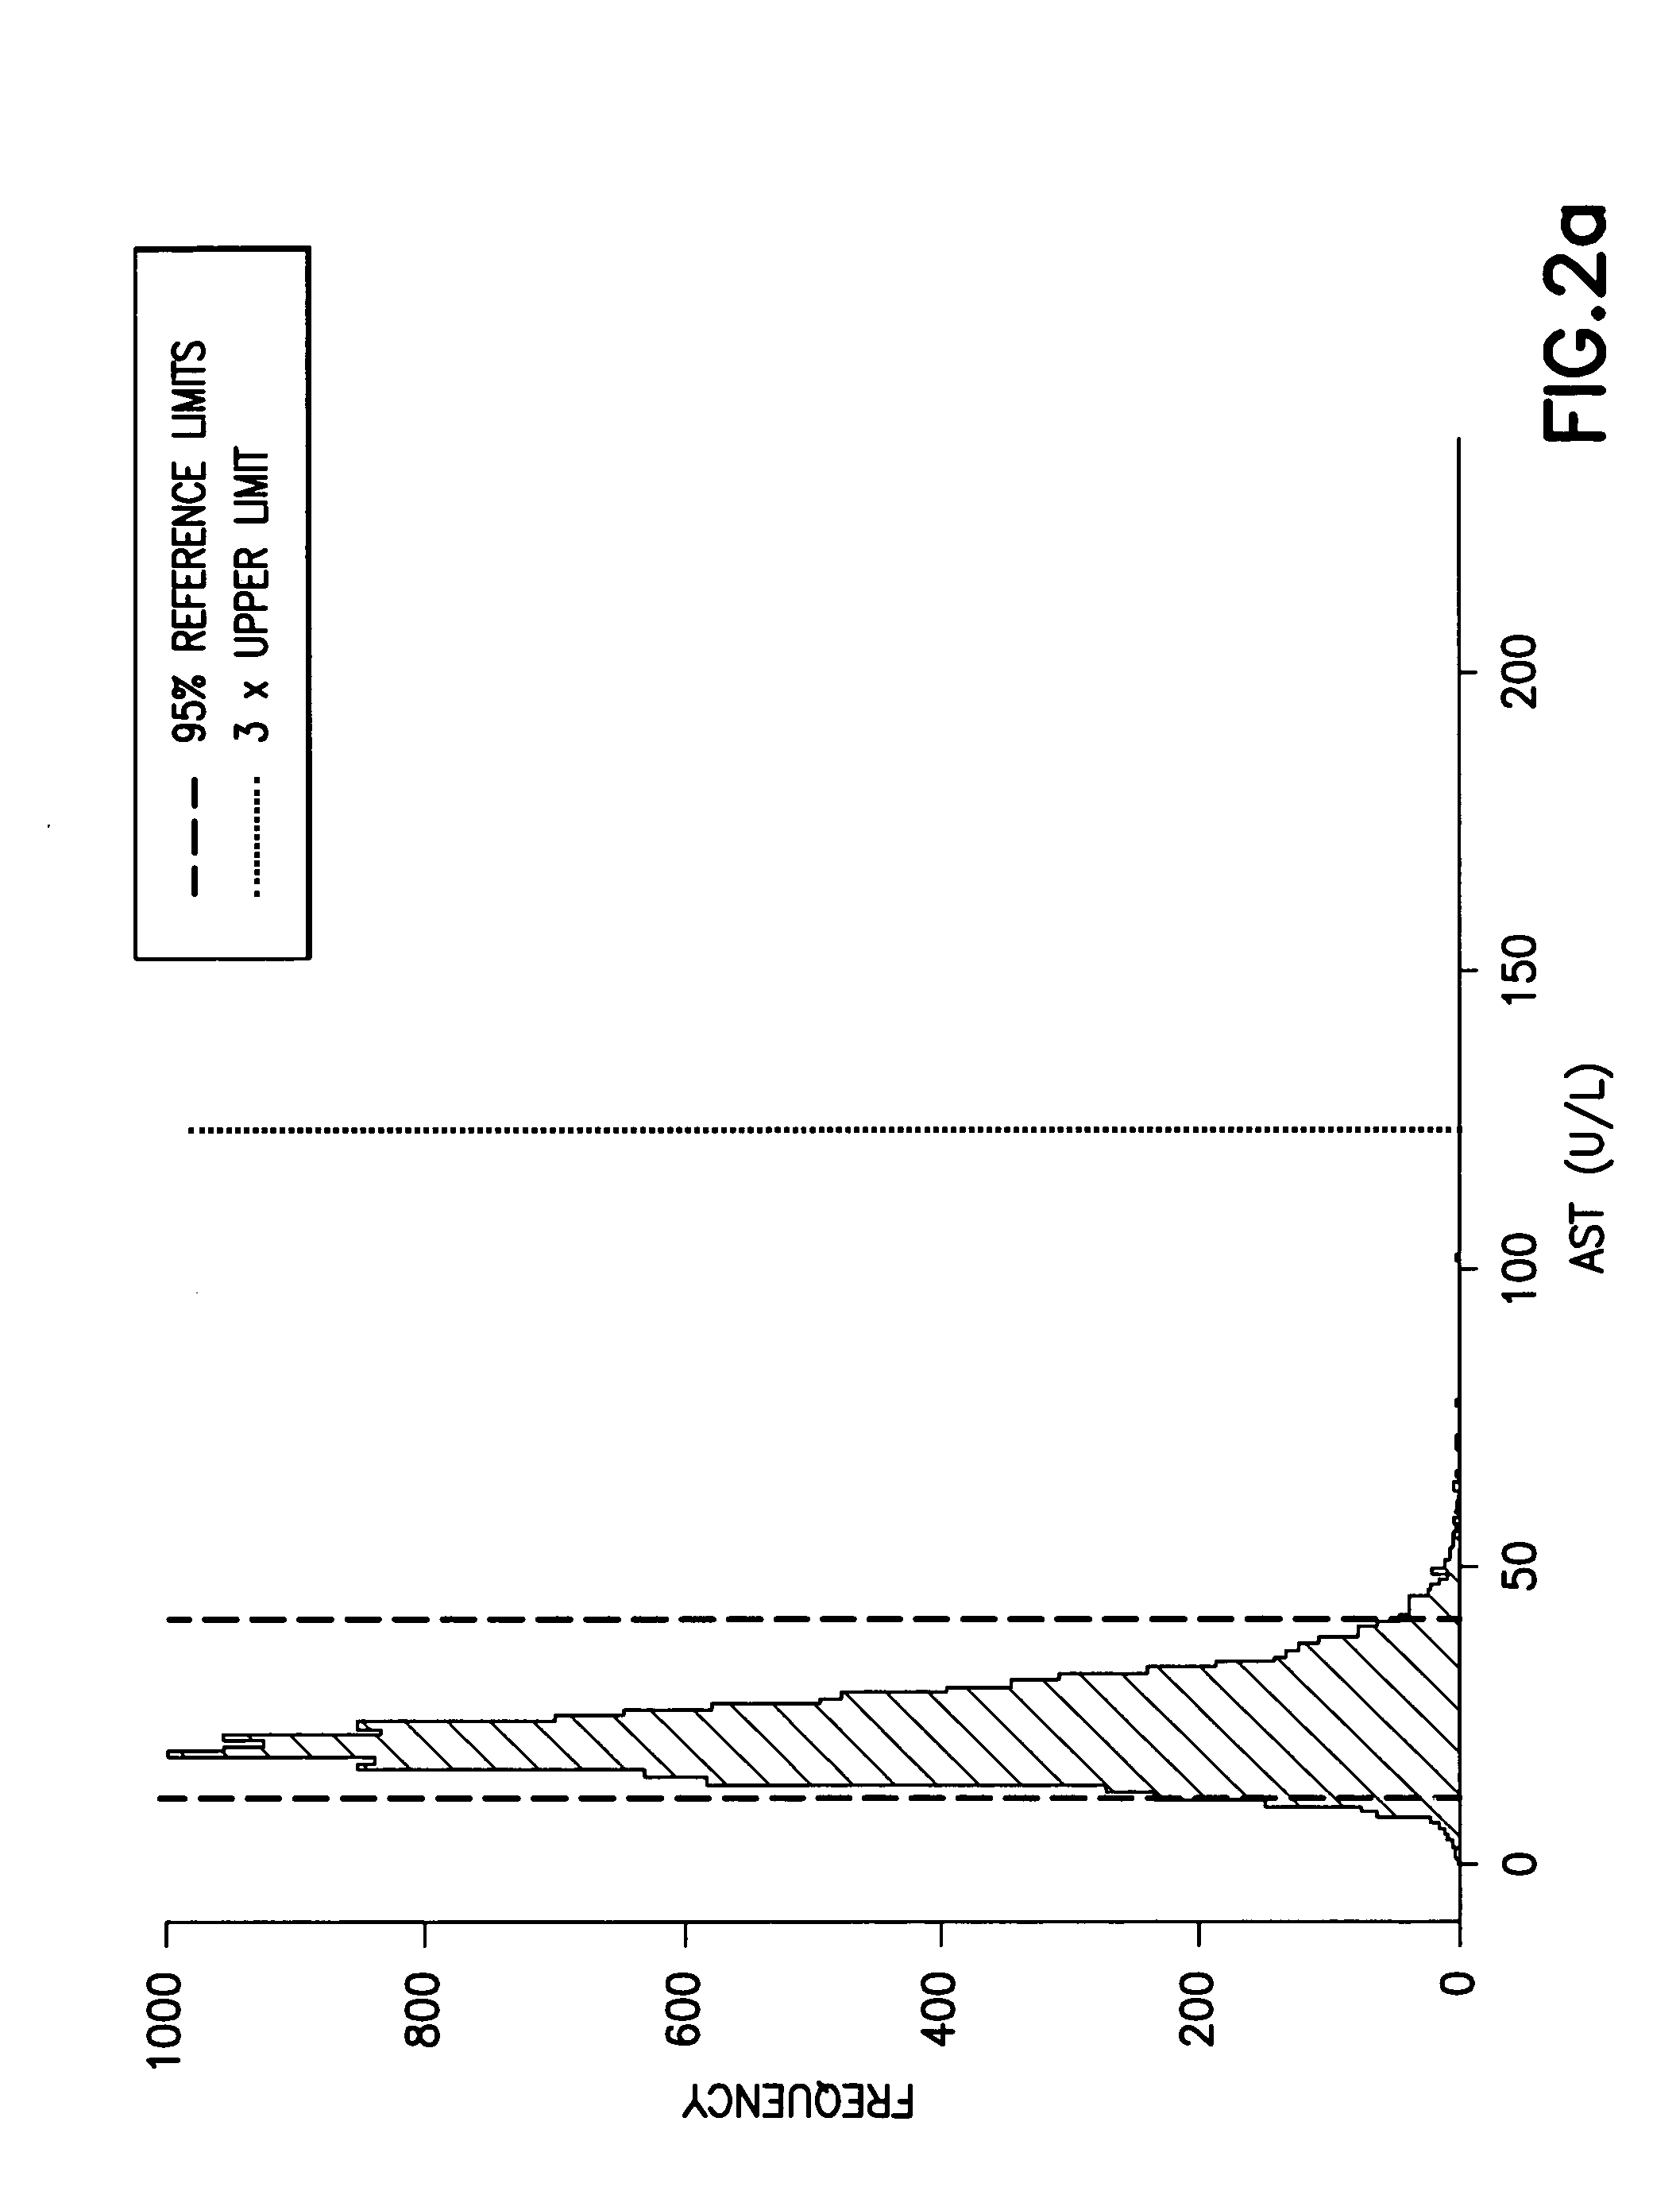 Method for predicting the onset or change of a medical condition